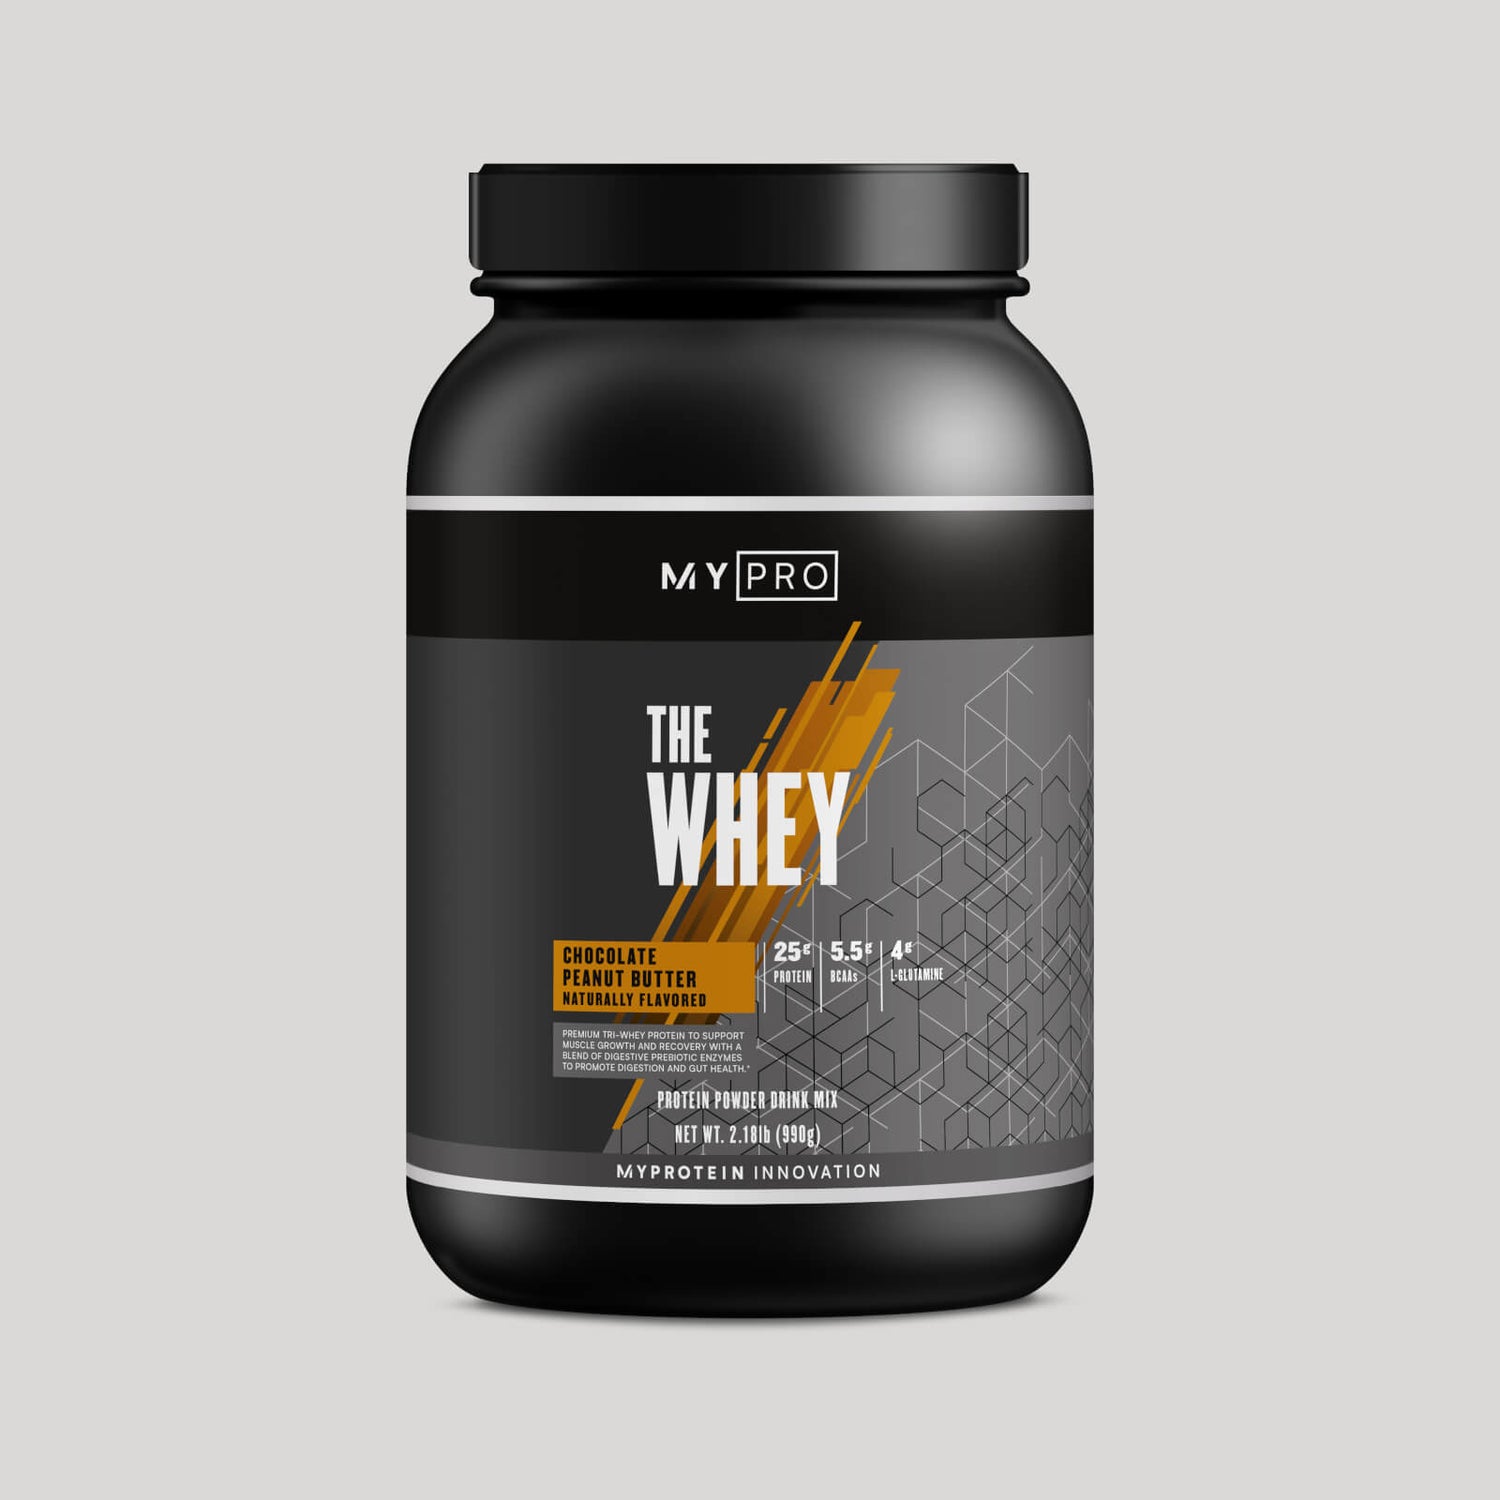 NSF THE Whey - 2.3lb - Chocolate Peanut Butter